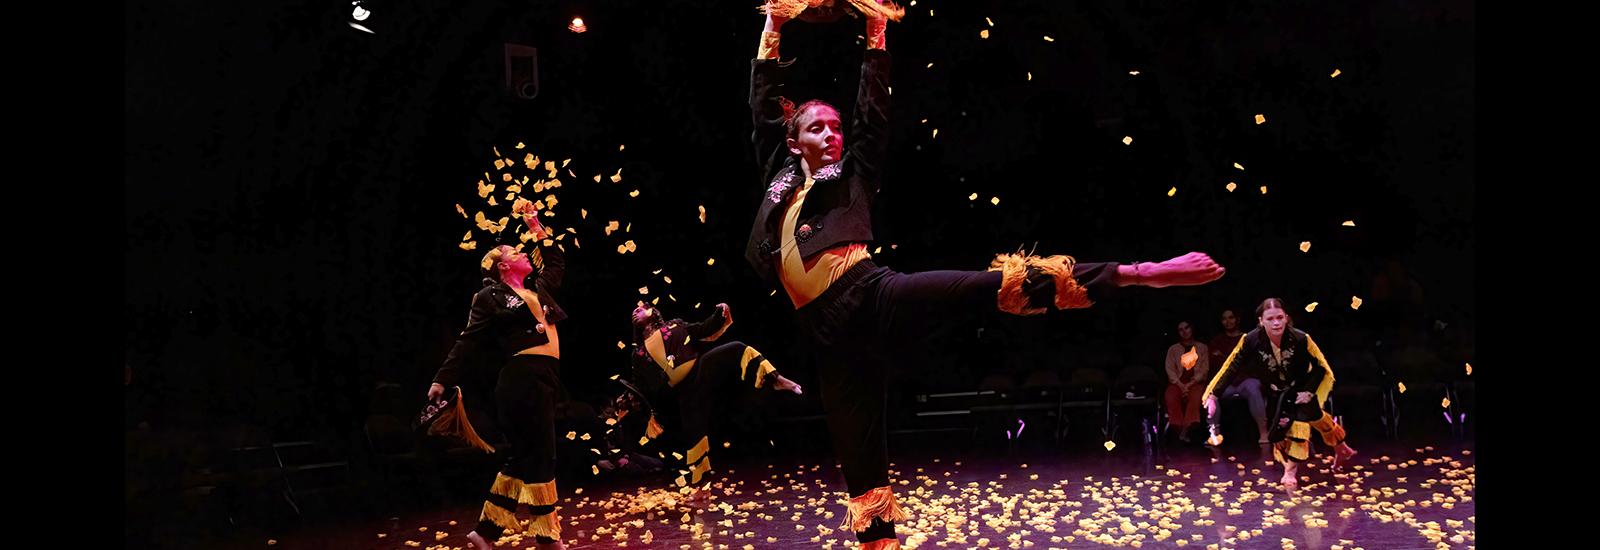 Dancers performing on a stage with orange flower petals falling 